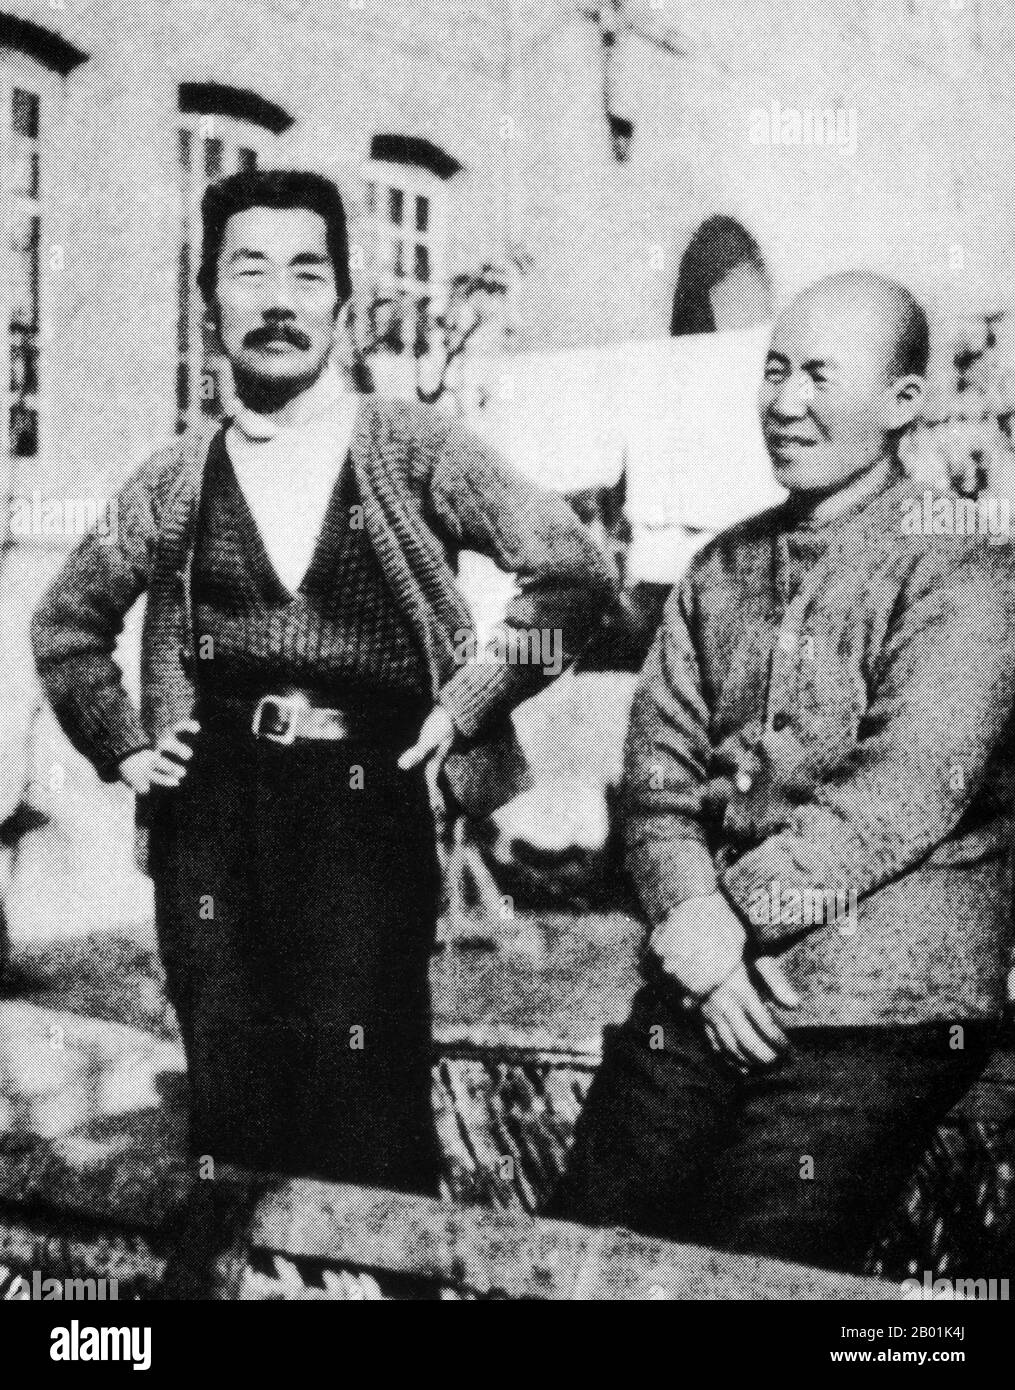 China: The writer Lu Xun (25 September 1881 - 19 October 1936) together with his close Japanese friend Kanzo Uchiyama (11 January 1885 - 20 September 1959) in Shanghai, c. 1934.  Kanzo Uchiyama settled in Shanghai with his wife shortly after they were married in March of 1916. He first established a bookstore in 1917 on North Sichuan Road at a different address from the one where the store would later prosper from 1929 to 1945. Kanzo and Lu Xun first met in the original bookstore in October of 1927, and their friendship continued until Lu Xun’s death nearly ten years later. Stock Photo